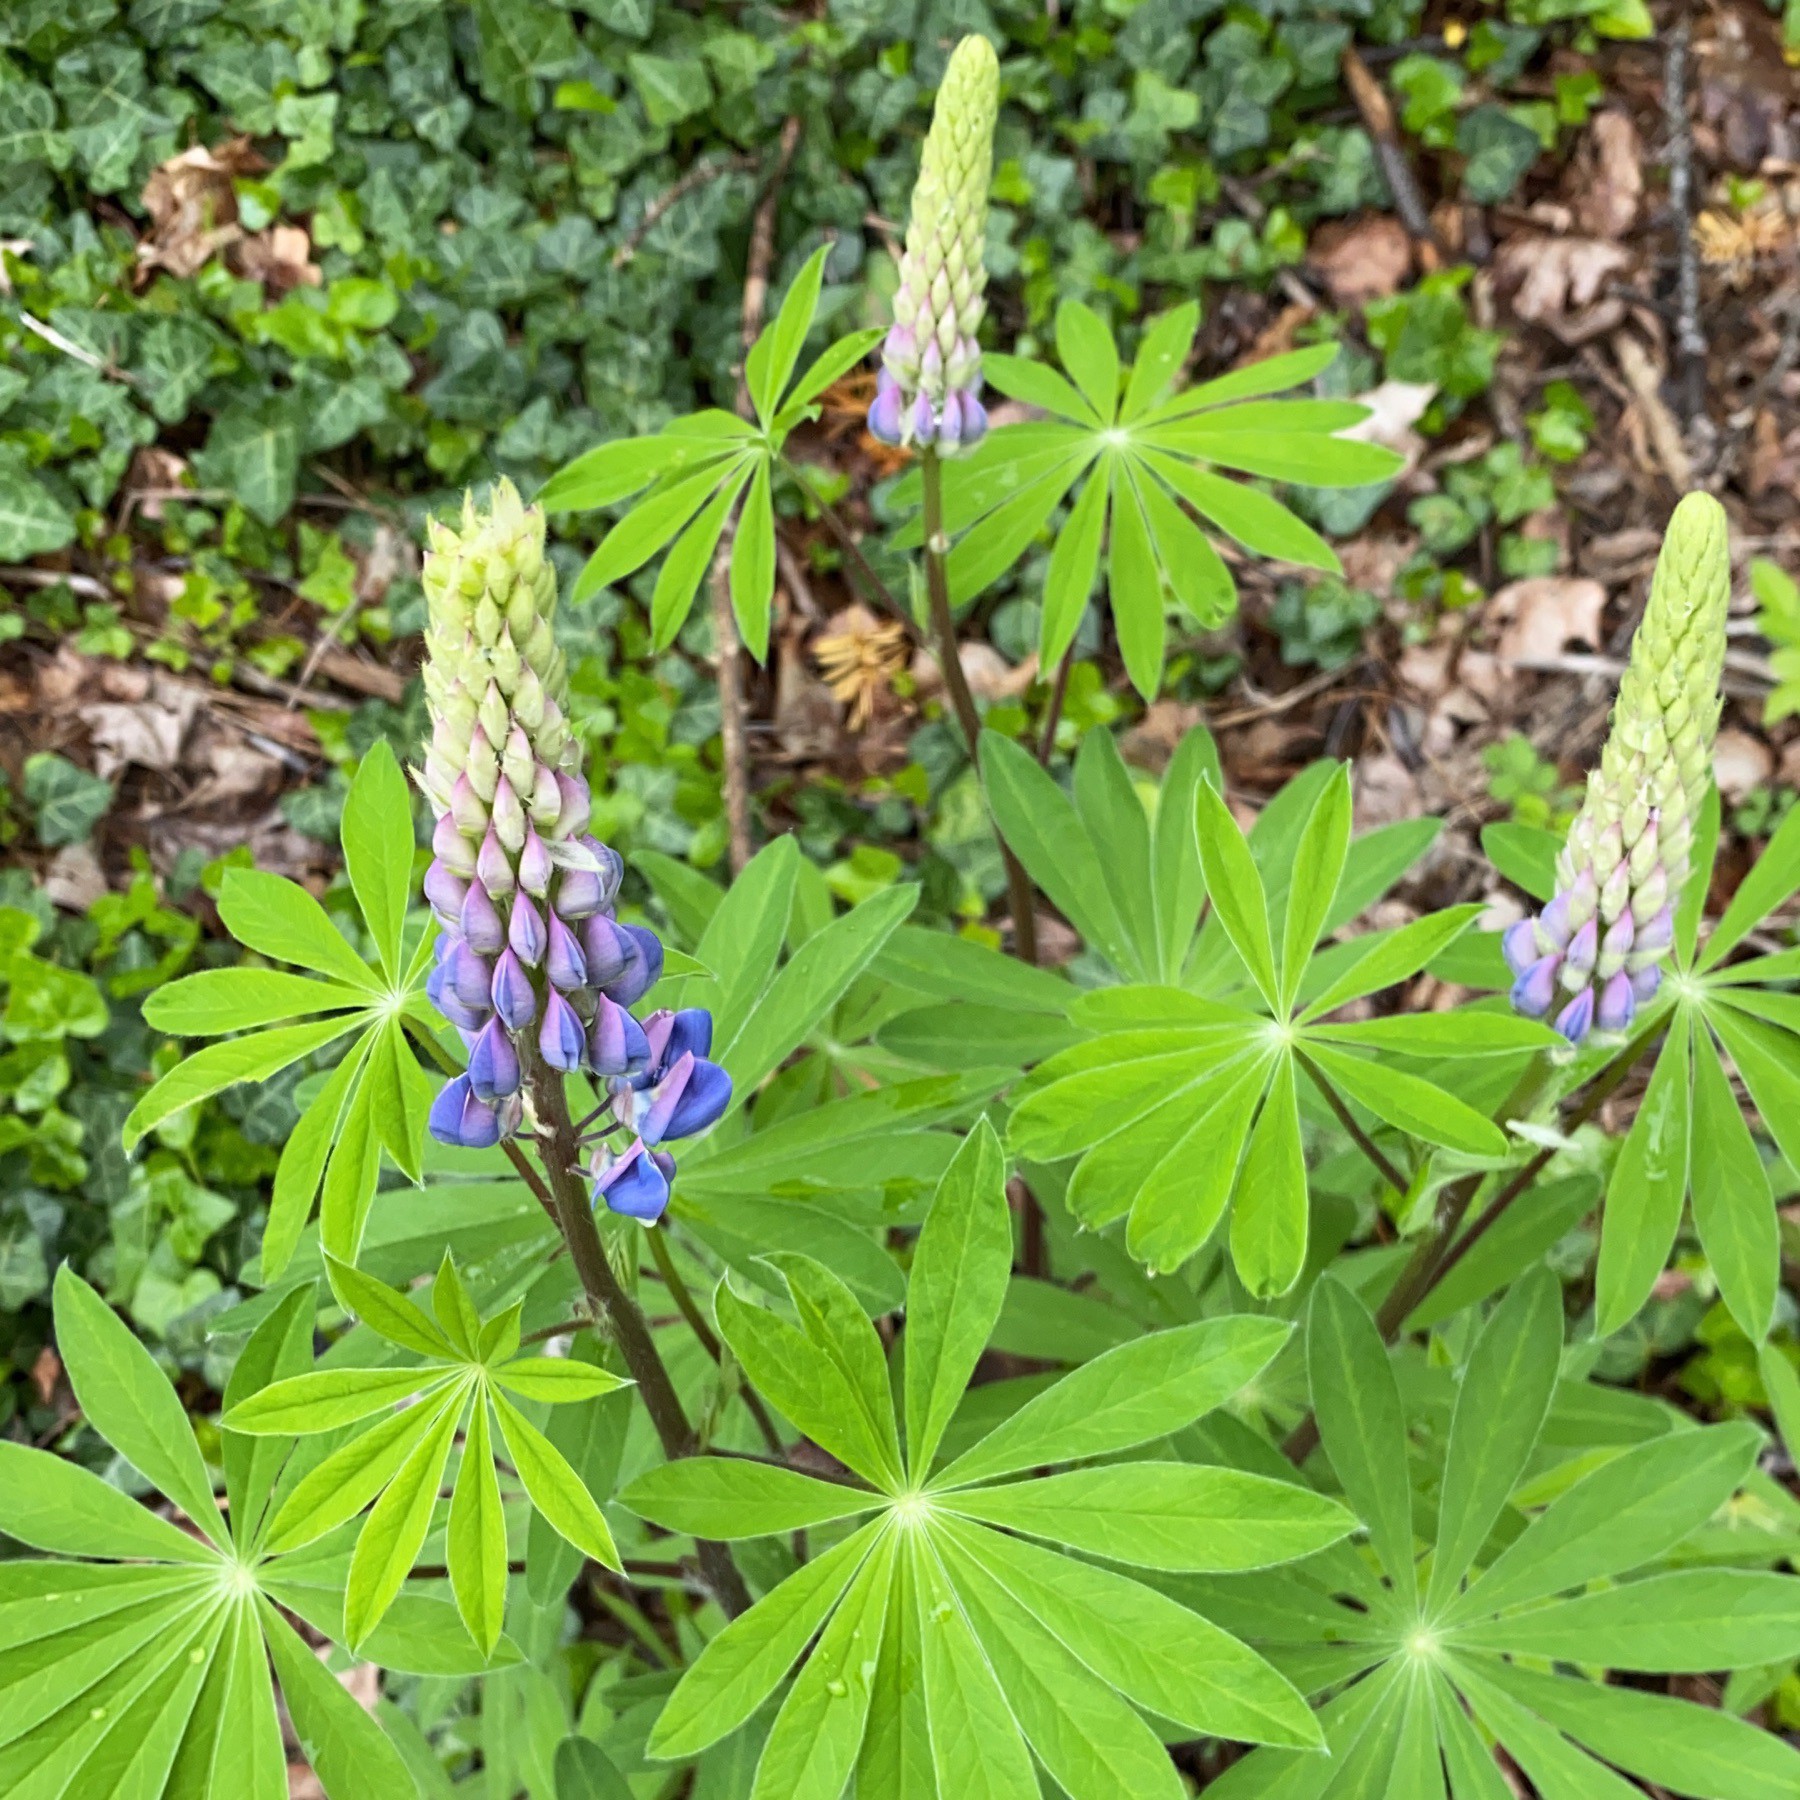 Lupin flowers and leaves.